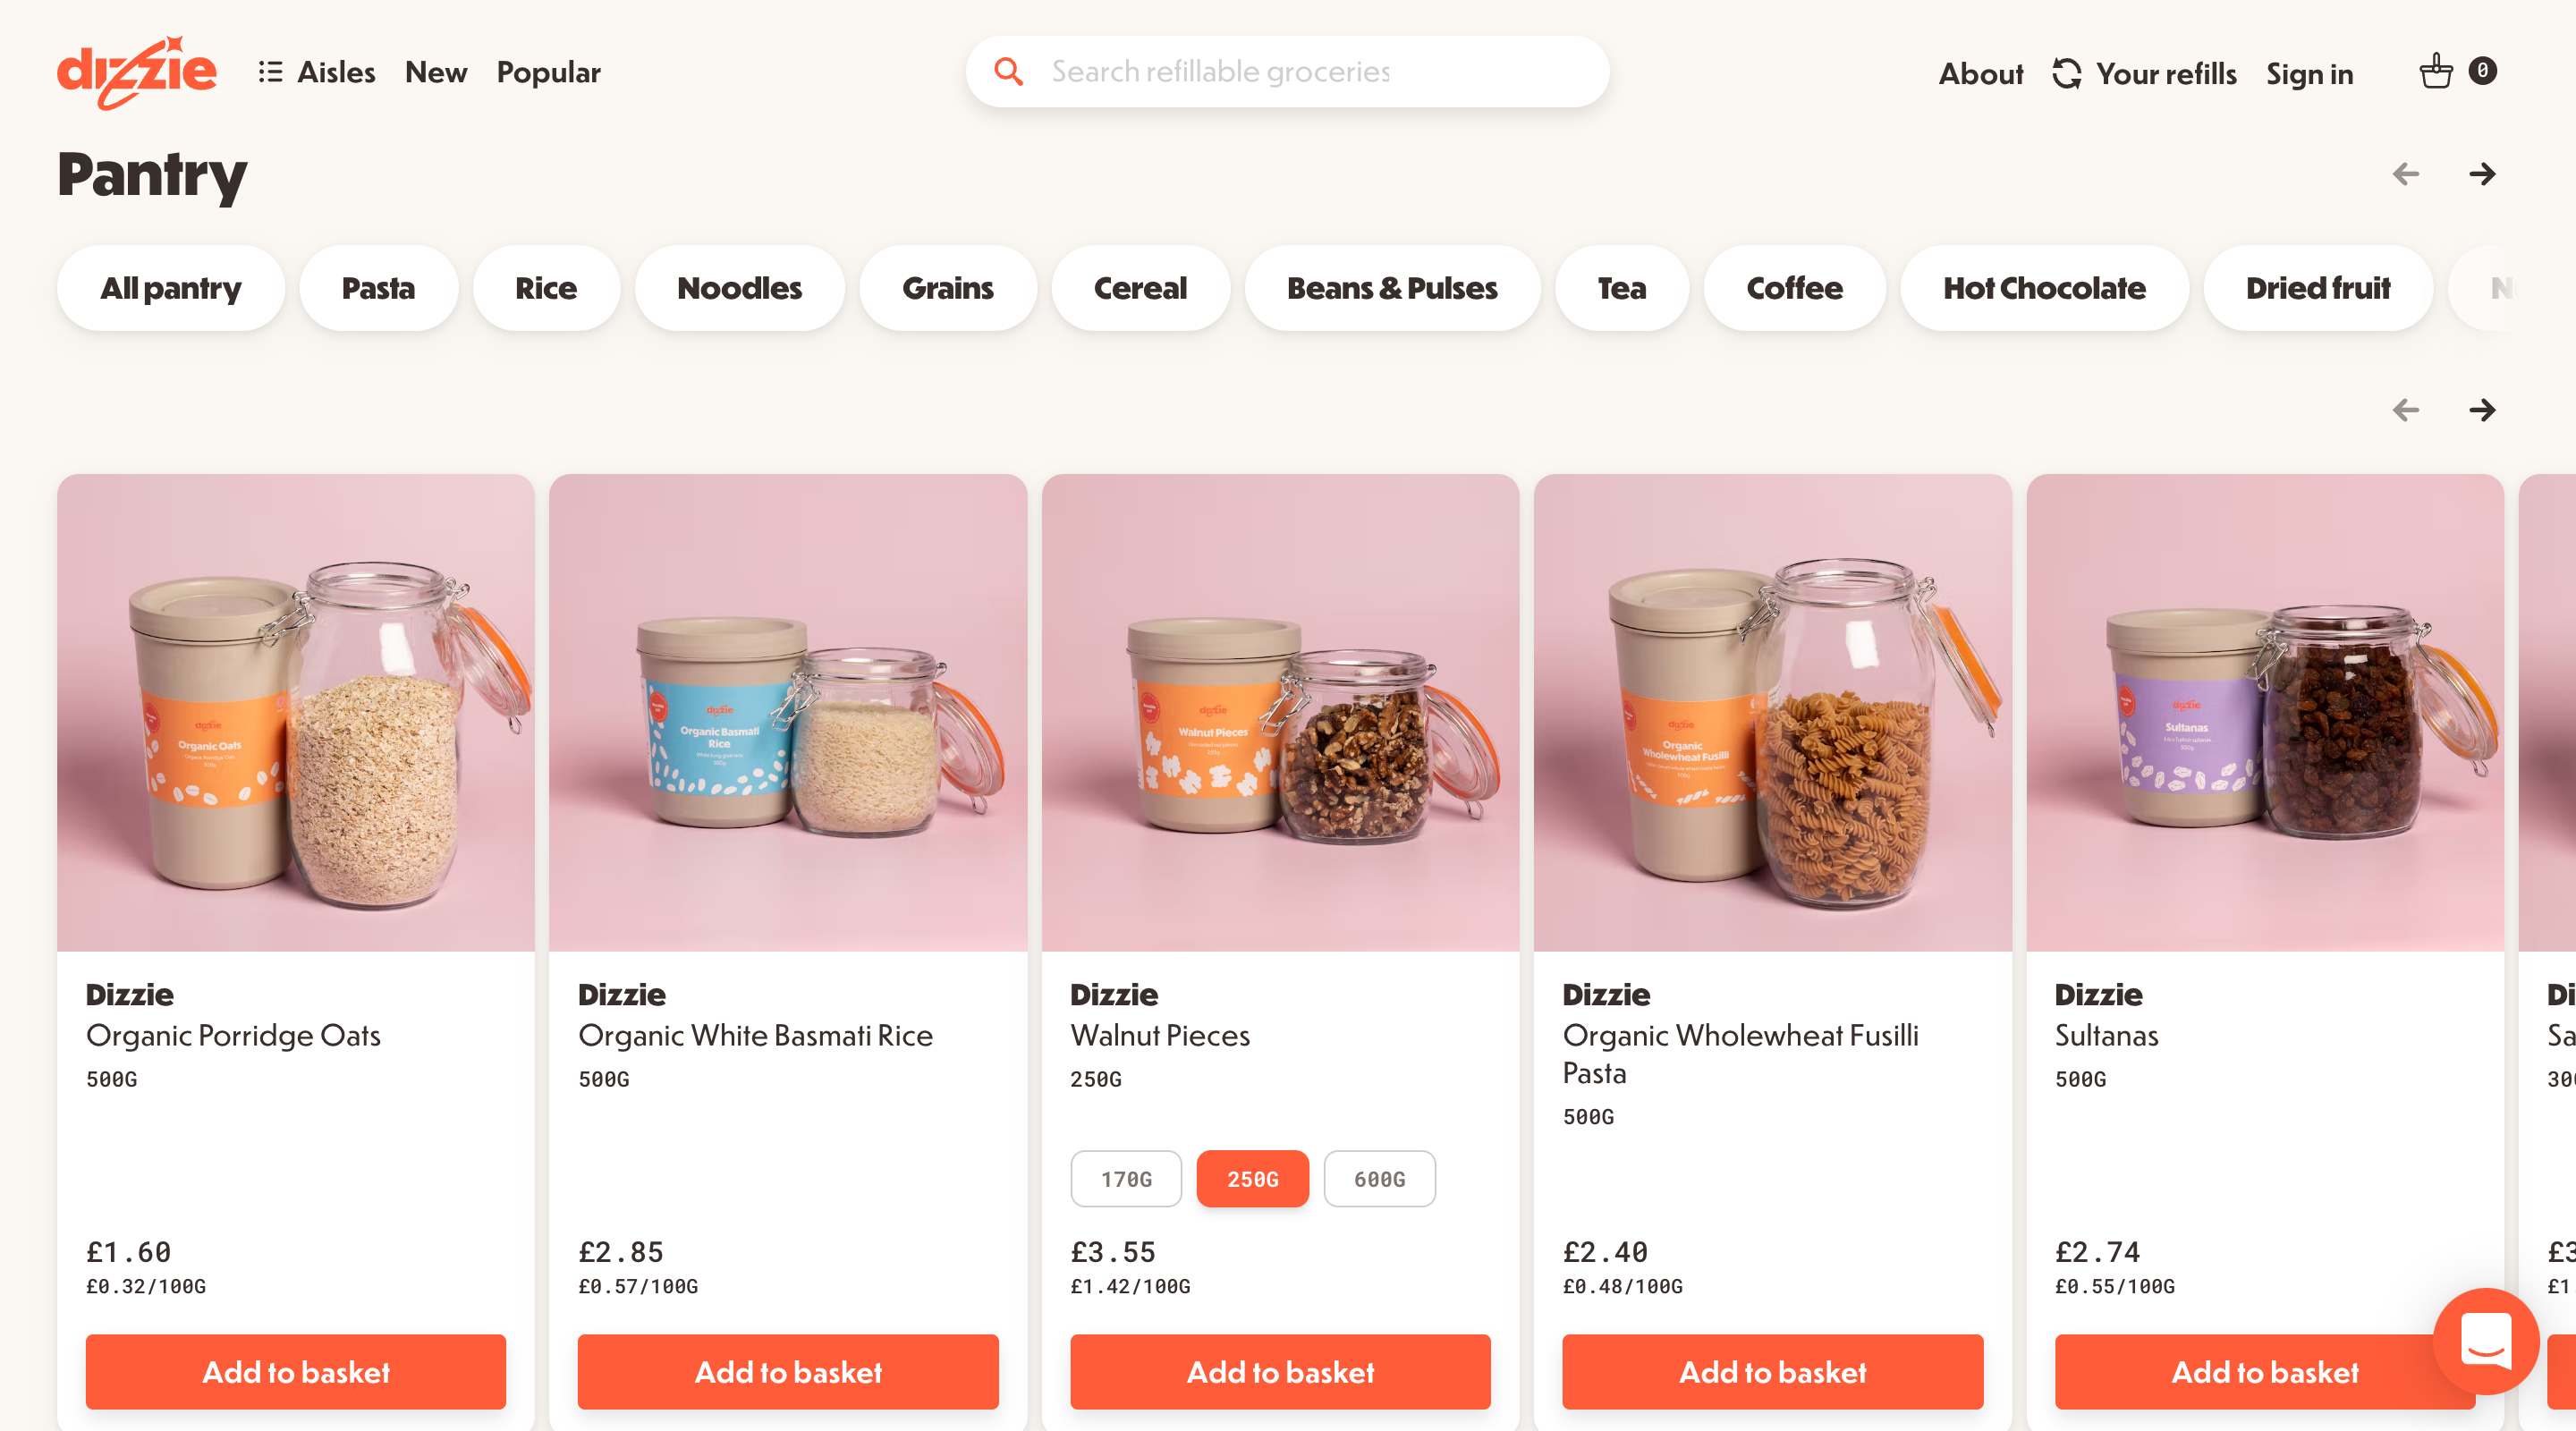 Screenshot showing a list of pantry products on the Dizzie website. The products are arranged left-to-right and each has a photograph, a weight, a price, and an 'Add to basket' button. Above the products is a list of categories to filter by, such as 'Noodles' and 'Coffee'.